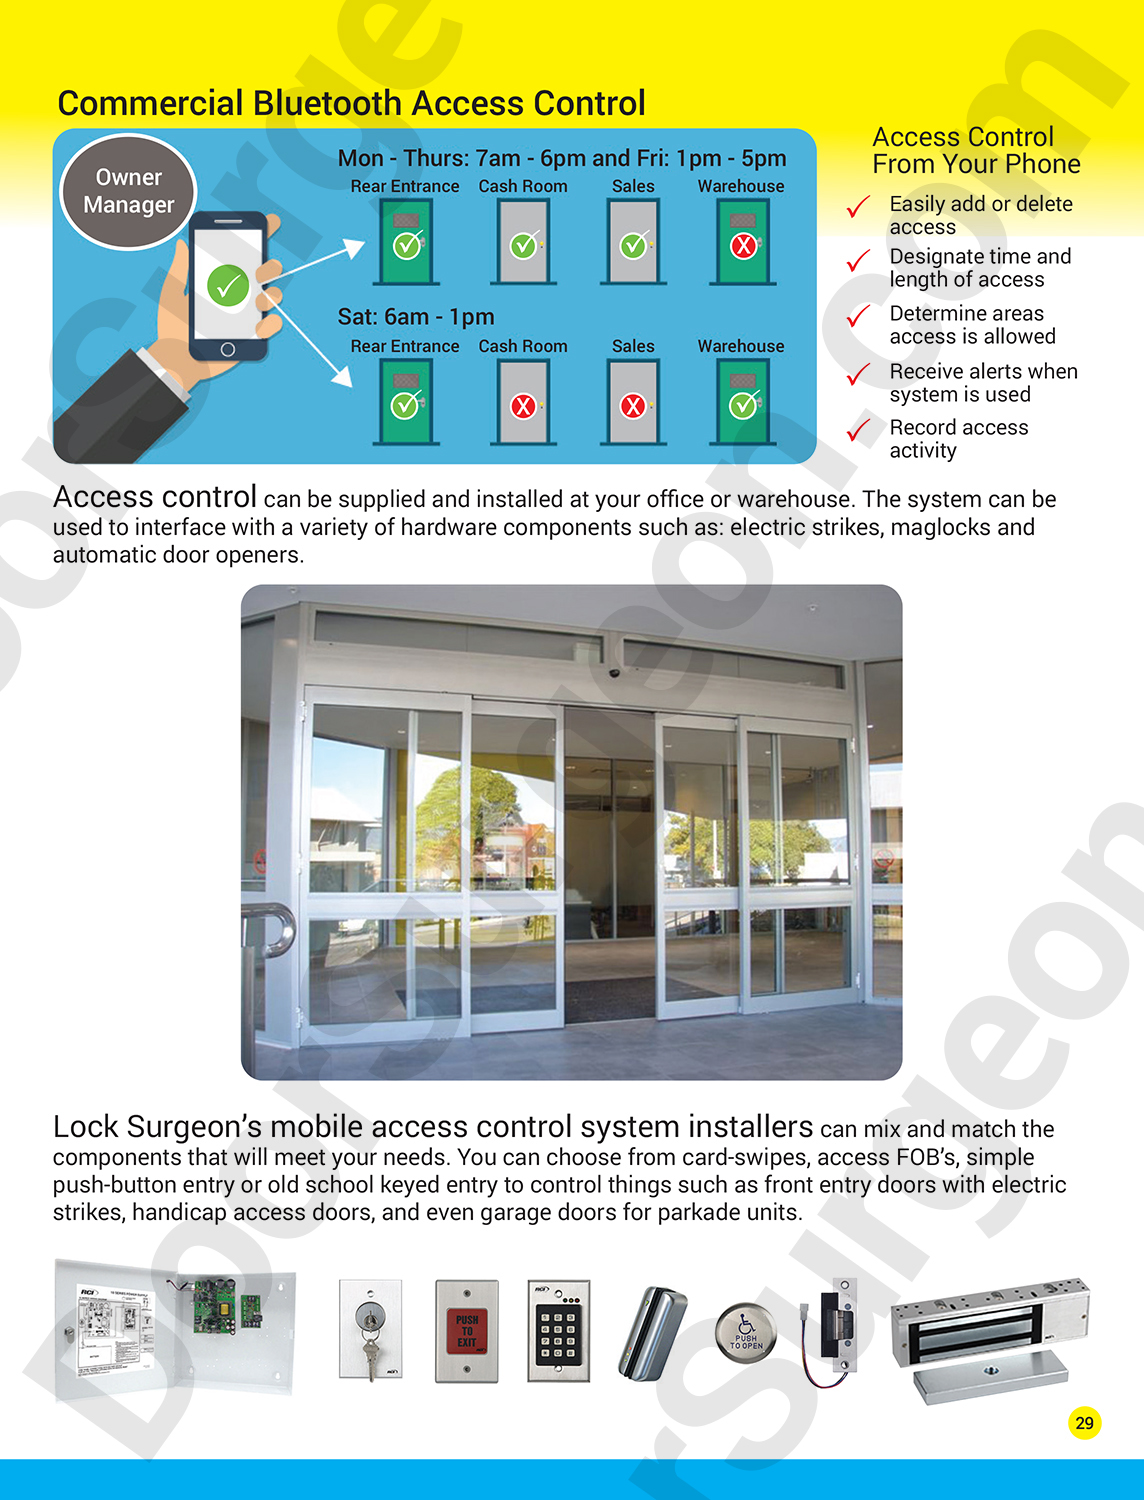 Commercial bluetooth access control supplied & installed at your office or warehouse by Door Surgeon